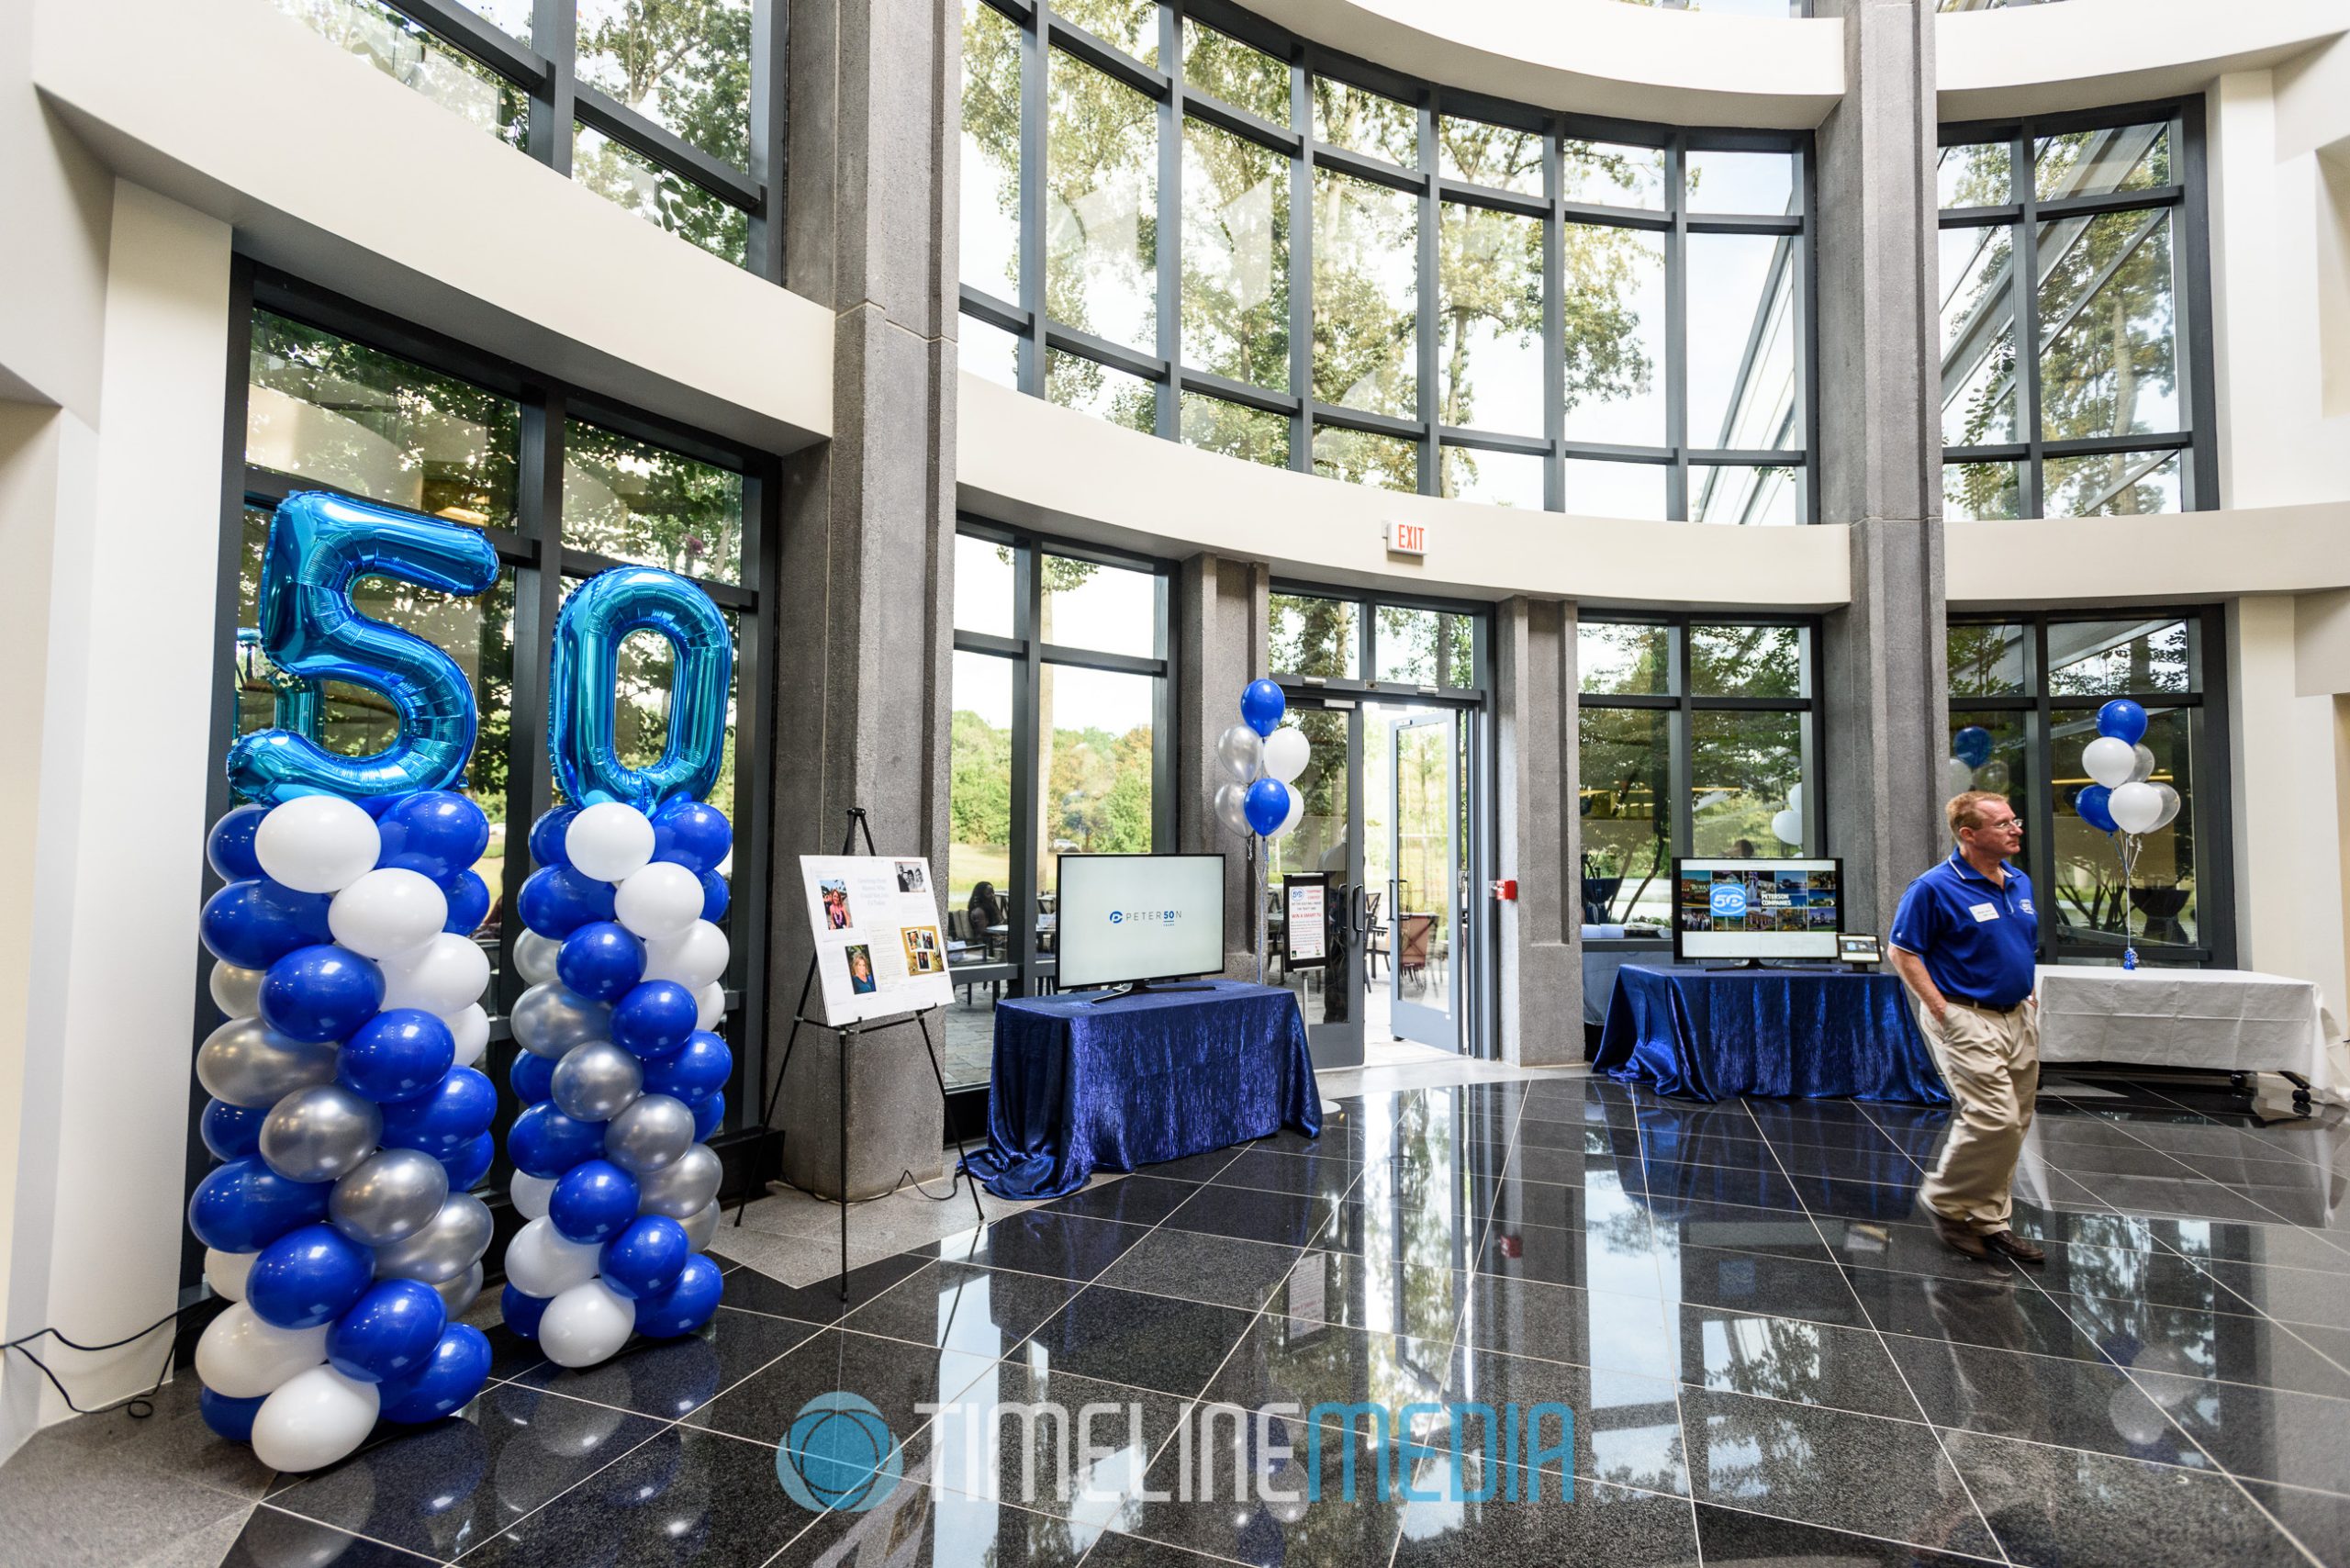 Lobby at the Peterson Companies at their 50 year anniversary party ©TimeLine Media